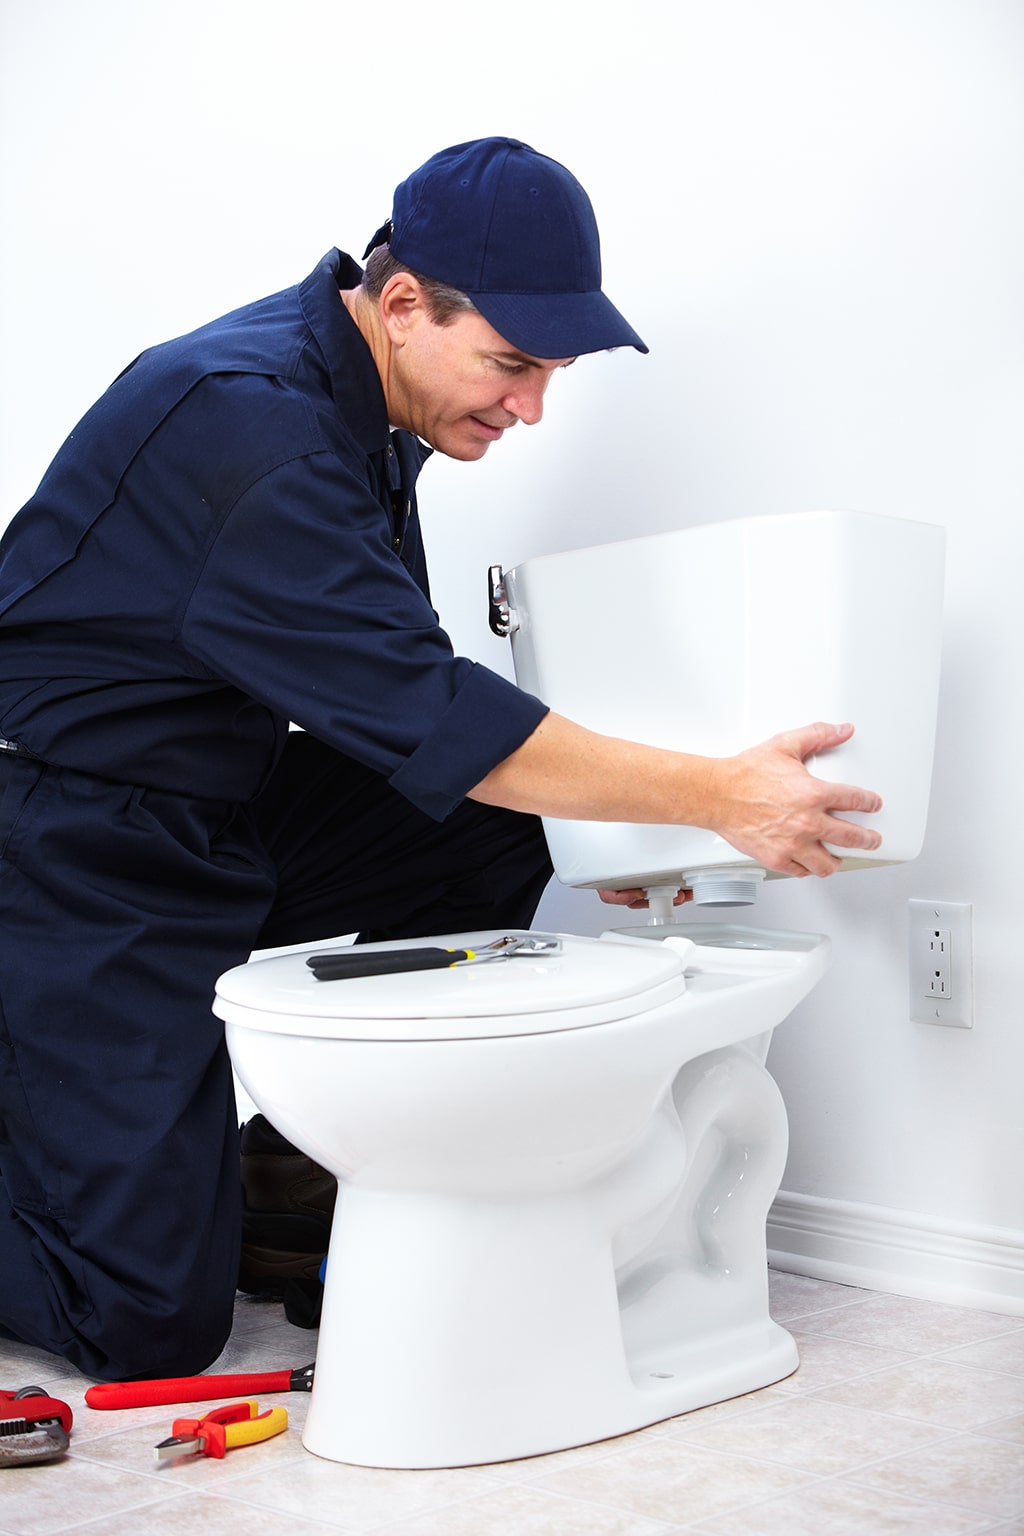 How Do I Know When to Contact a Plumber? | Myrtle Beach, SC